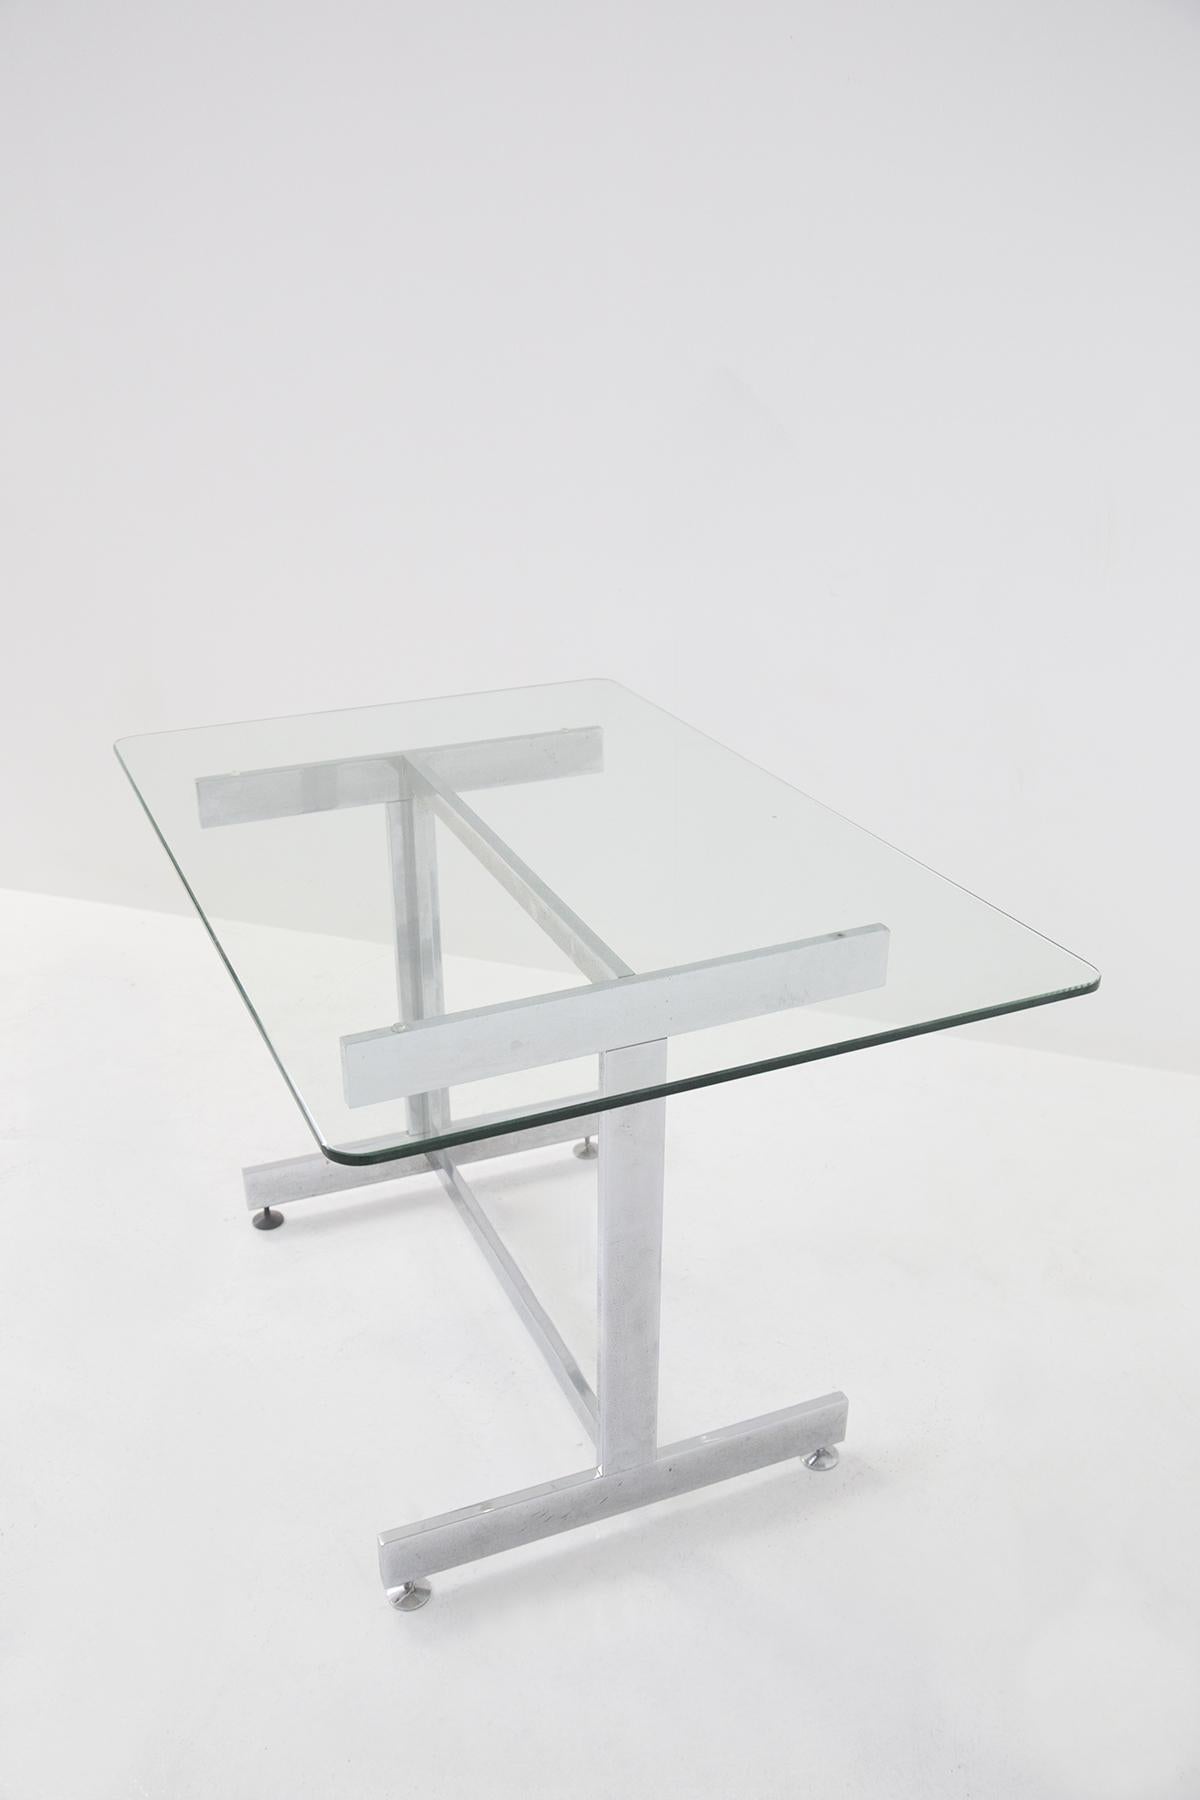 Steel and Glass Desk by Vittorio Introini from Vips Residence 3